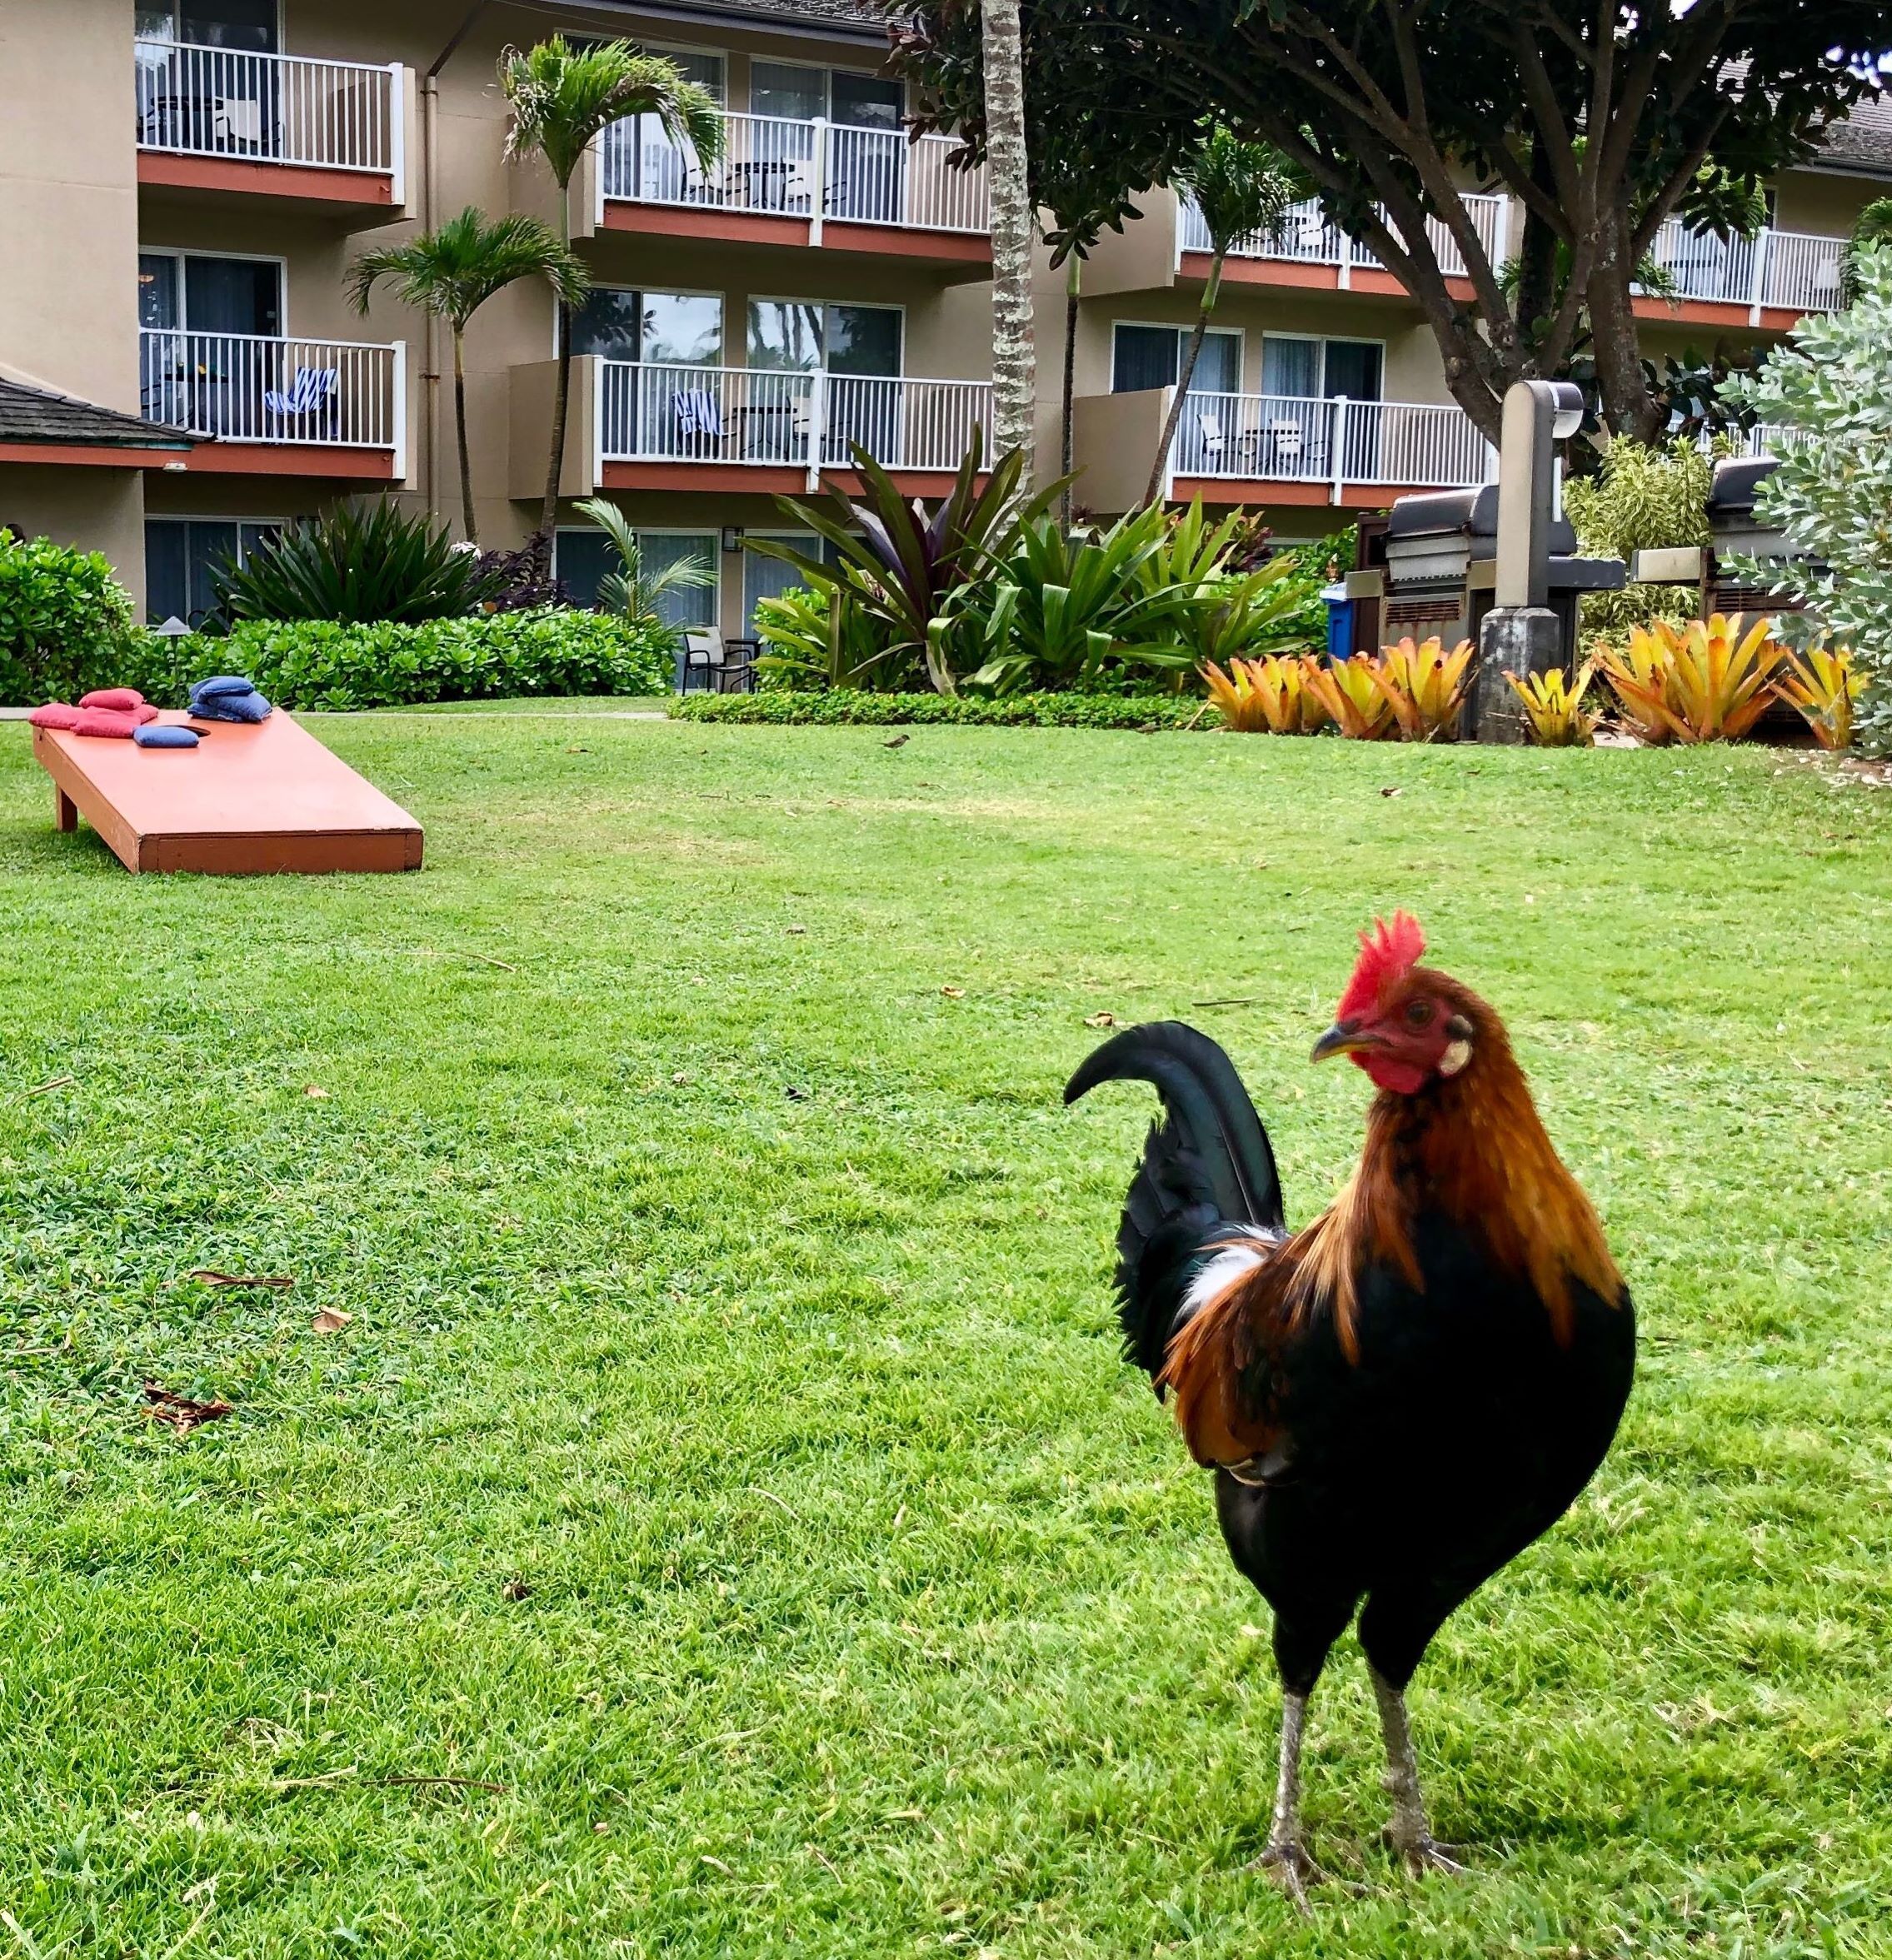 Caption: Wild Chickens are a tourist attraction in Kauai. They have no natural predators. These guys start crowing around 4 am every day!  Photo: @karenvchin